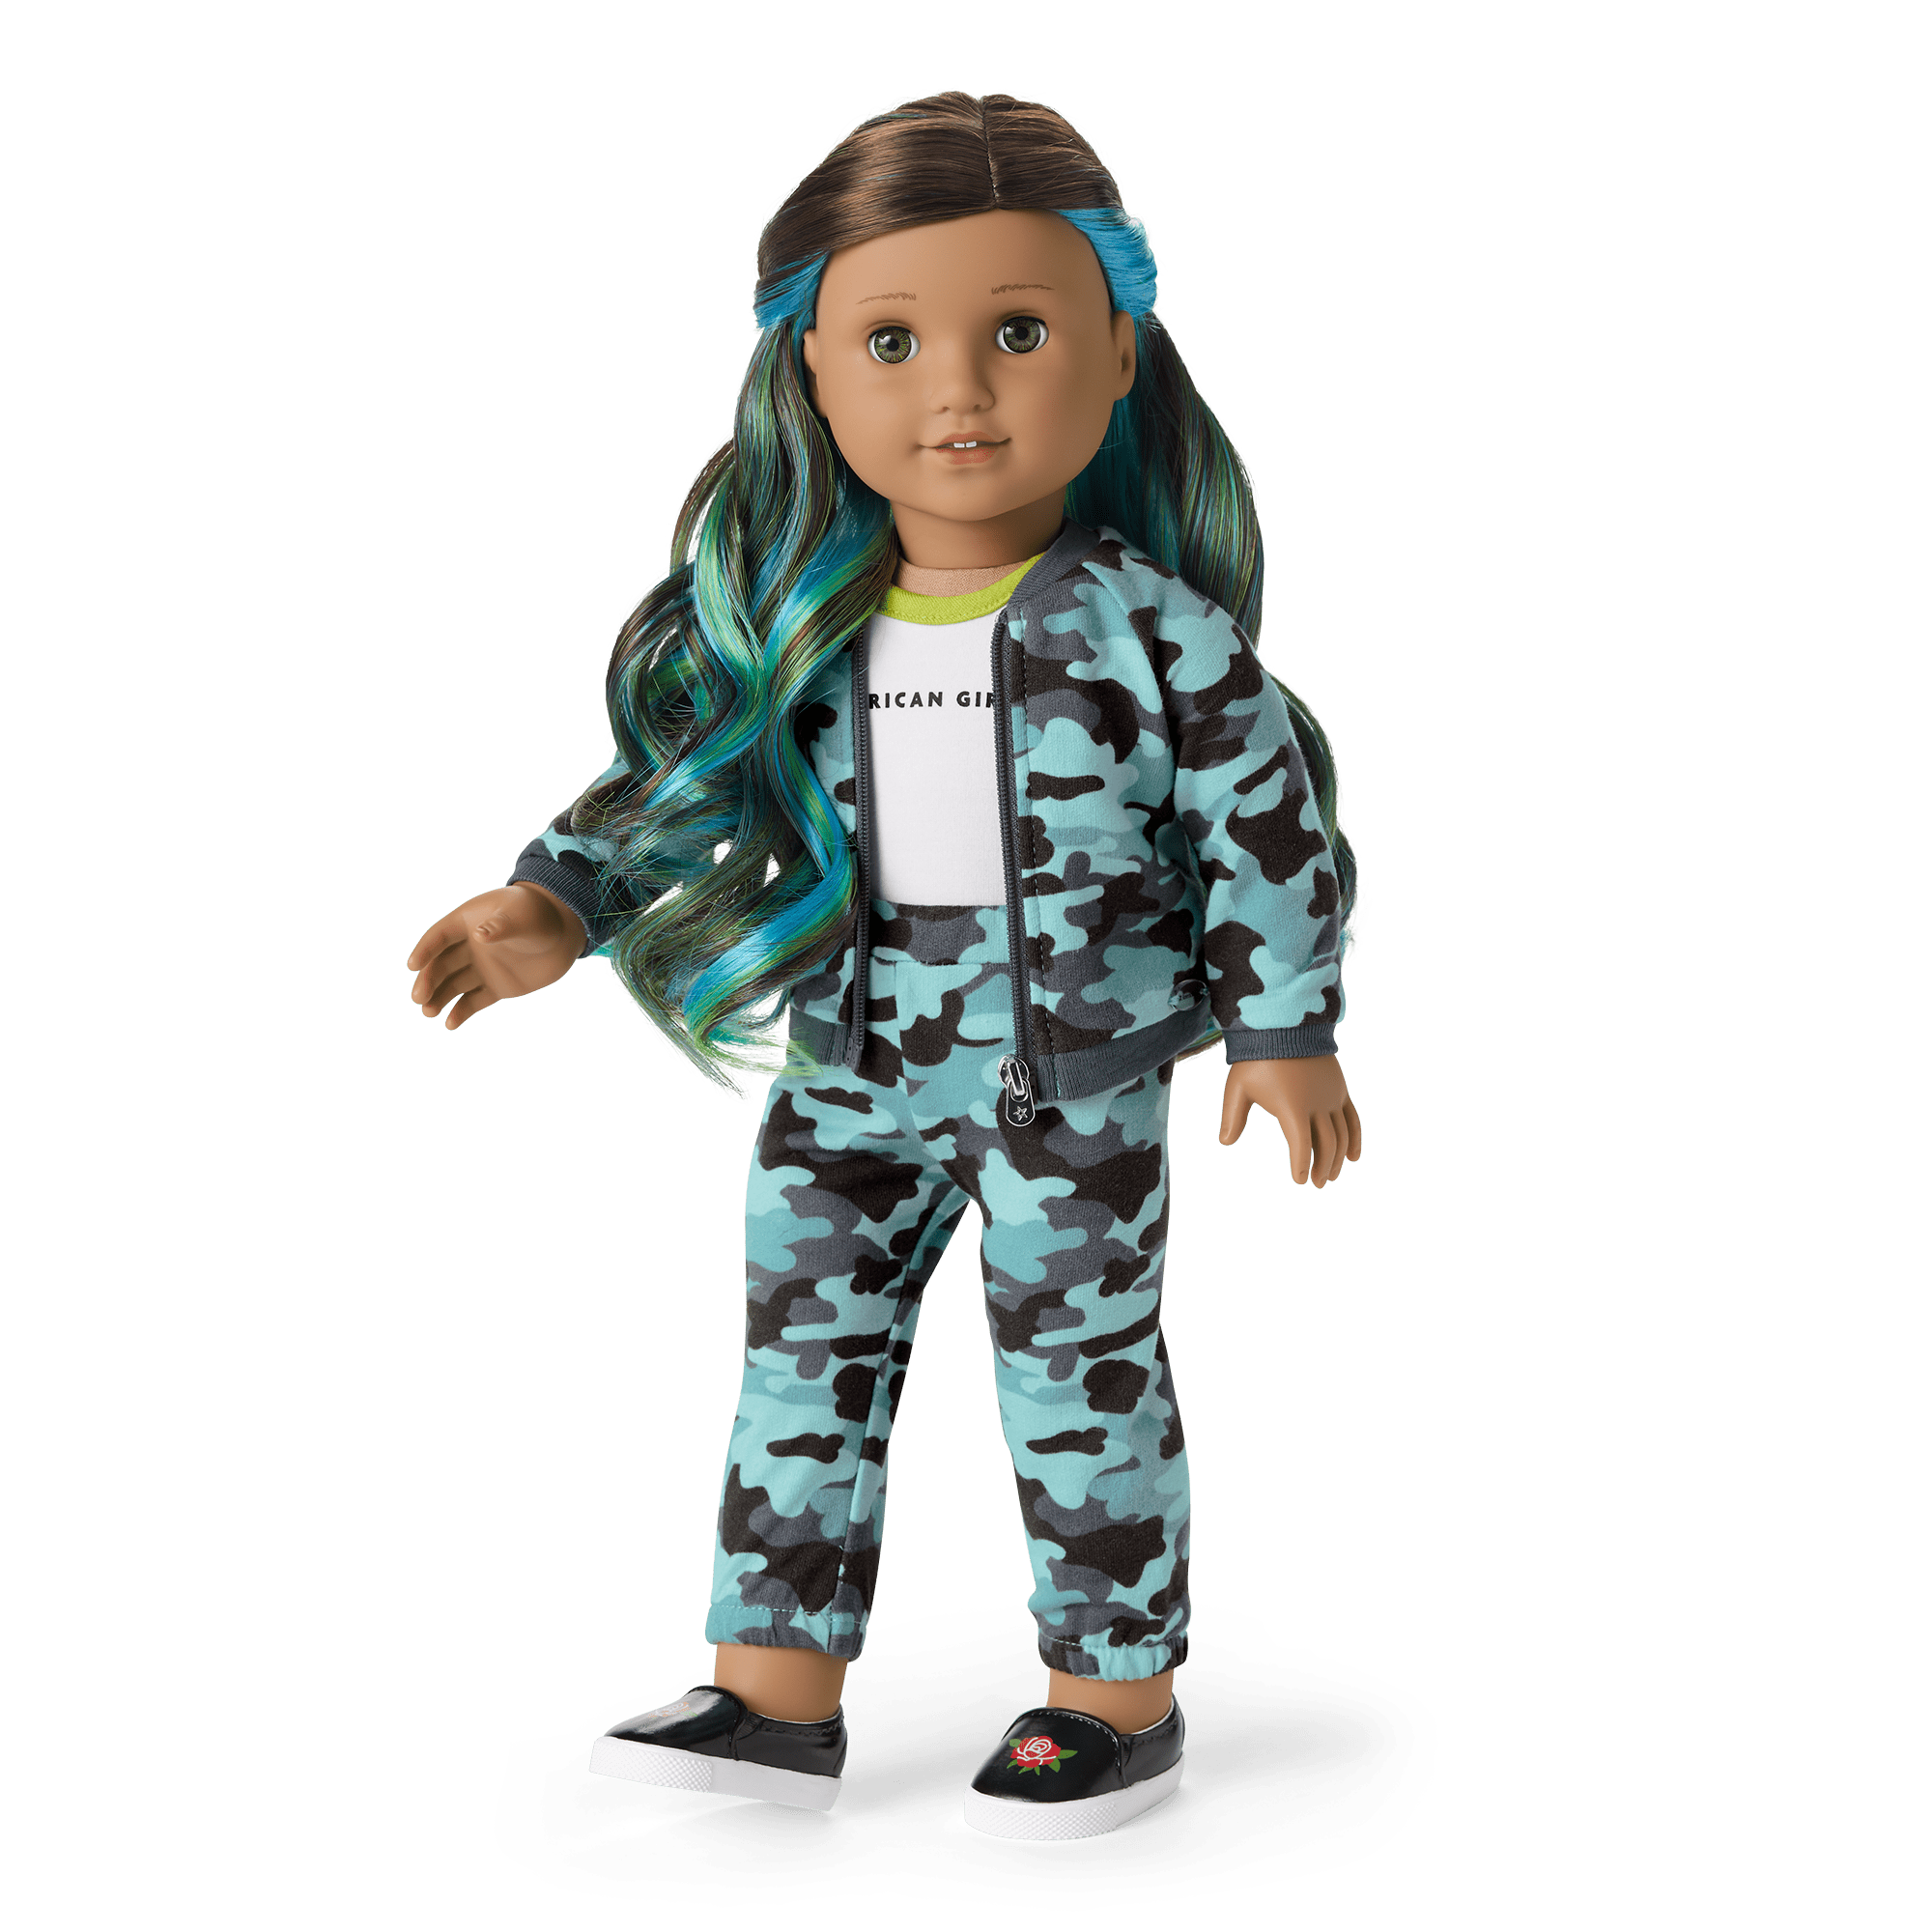 American Girl Truly Me Doll 89 Cool Camo with Book, Hazel Eyes, Dark Brown Hair with Blue & Green Highlights